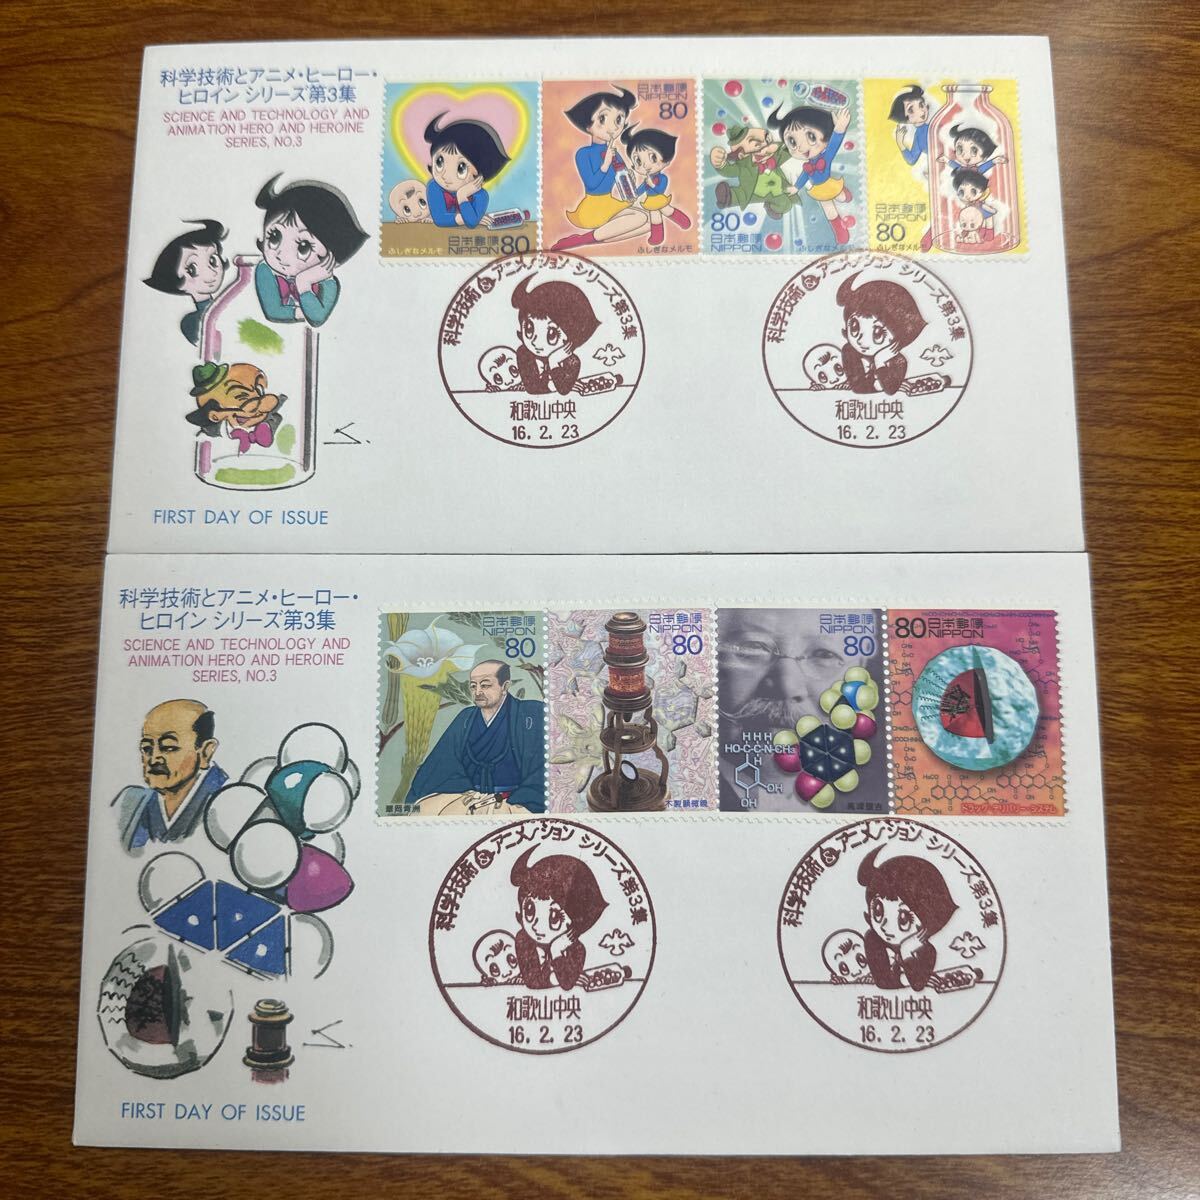  First Day Cover science technology . anime hero heroine series no. 3 compilation Heisei era 16 year issue memory seal 